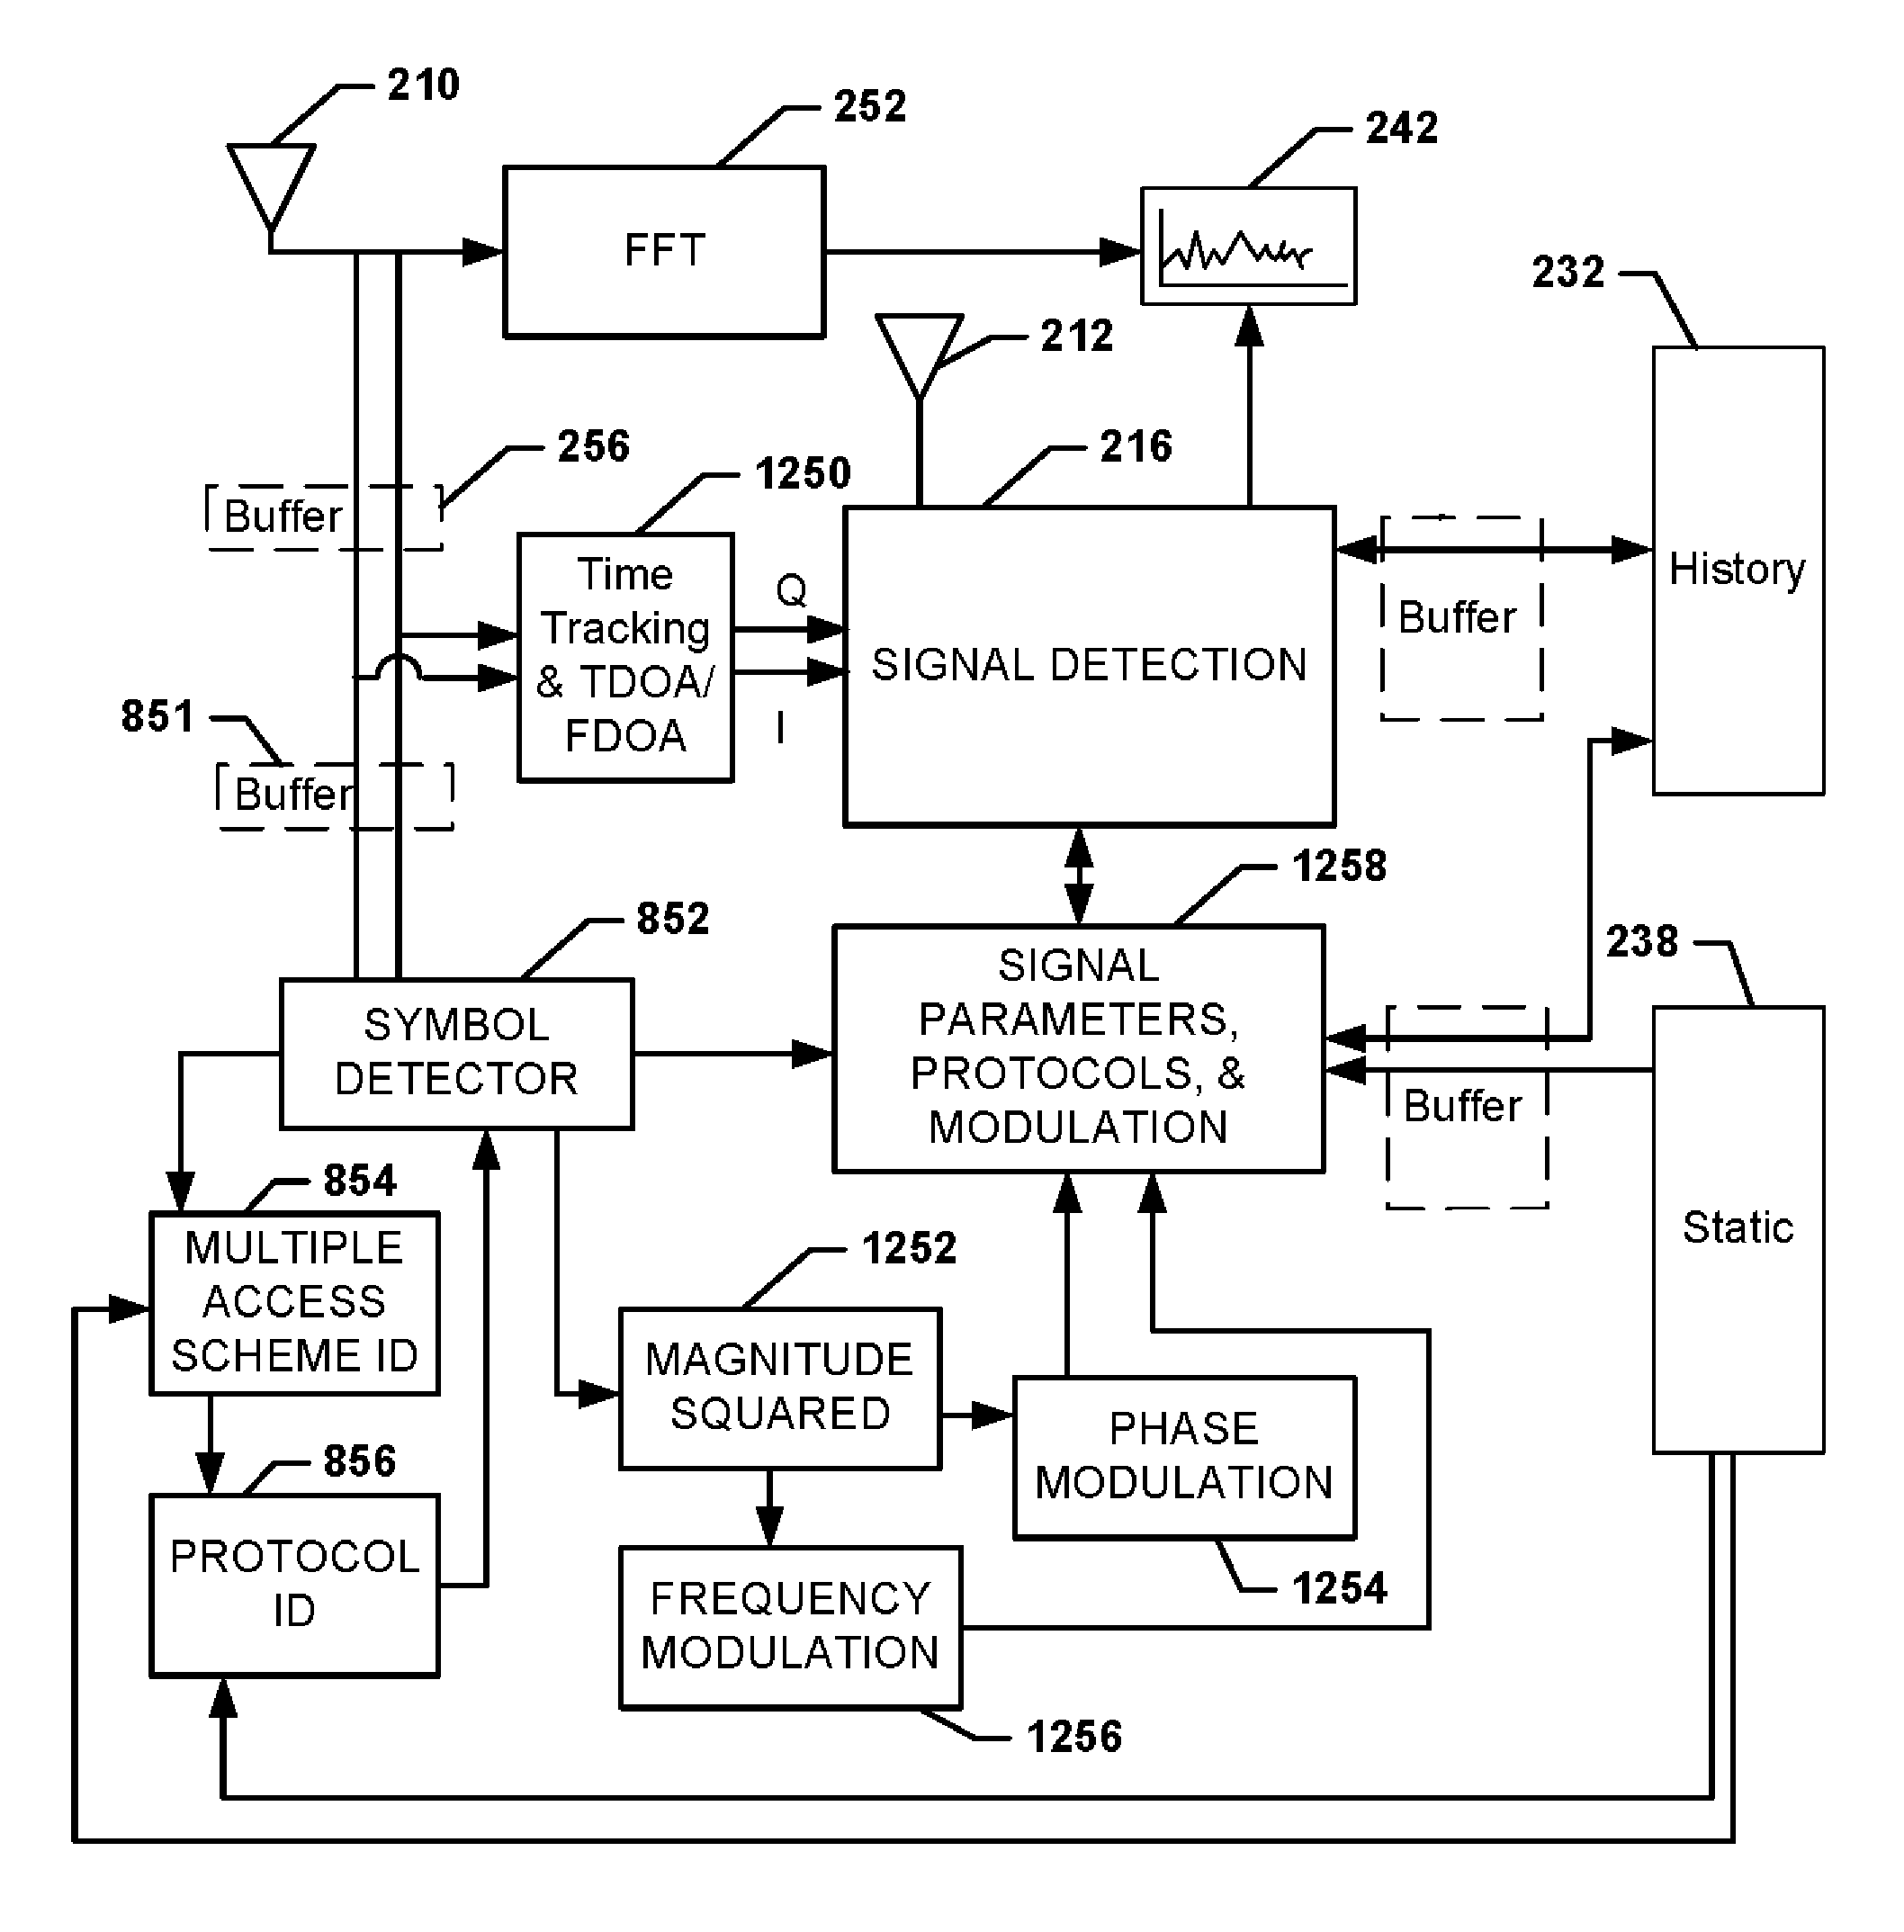 Systems, methods, and devices for electronic spectrum management